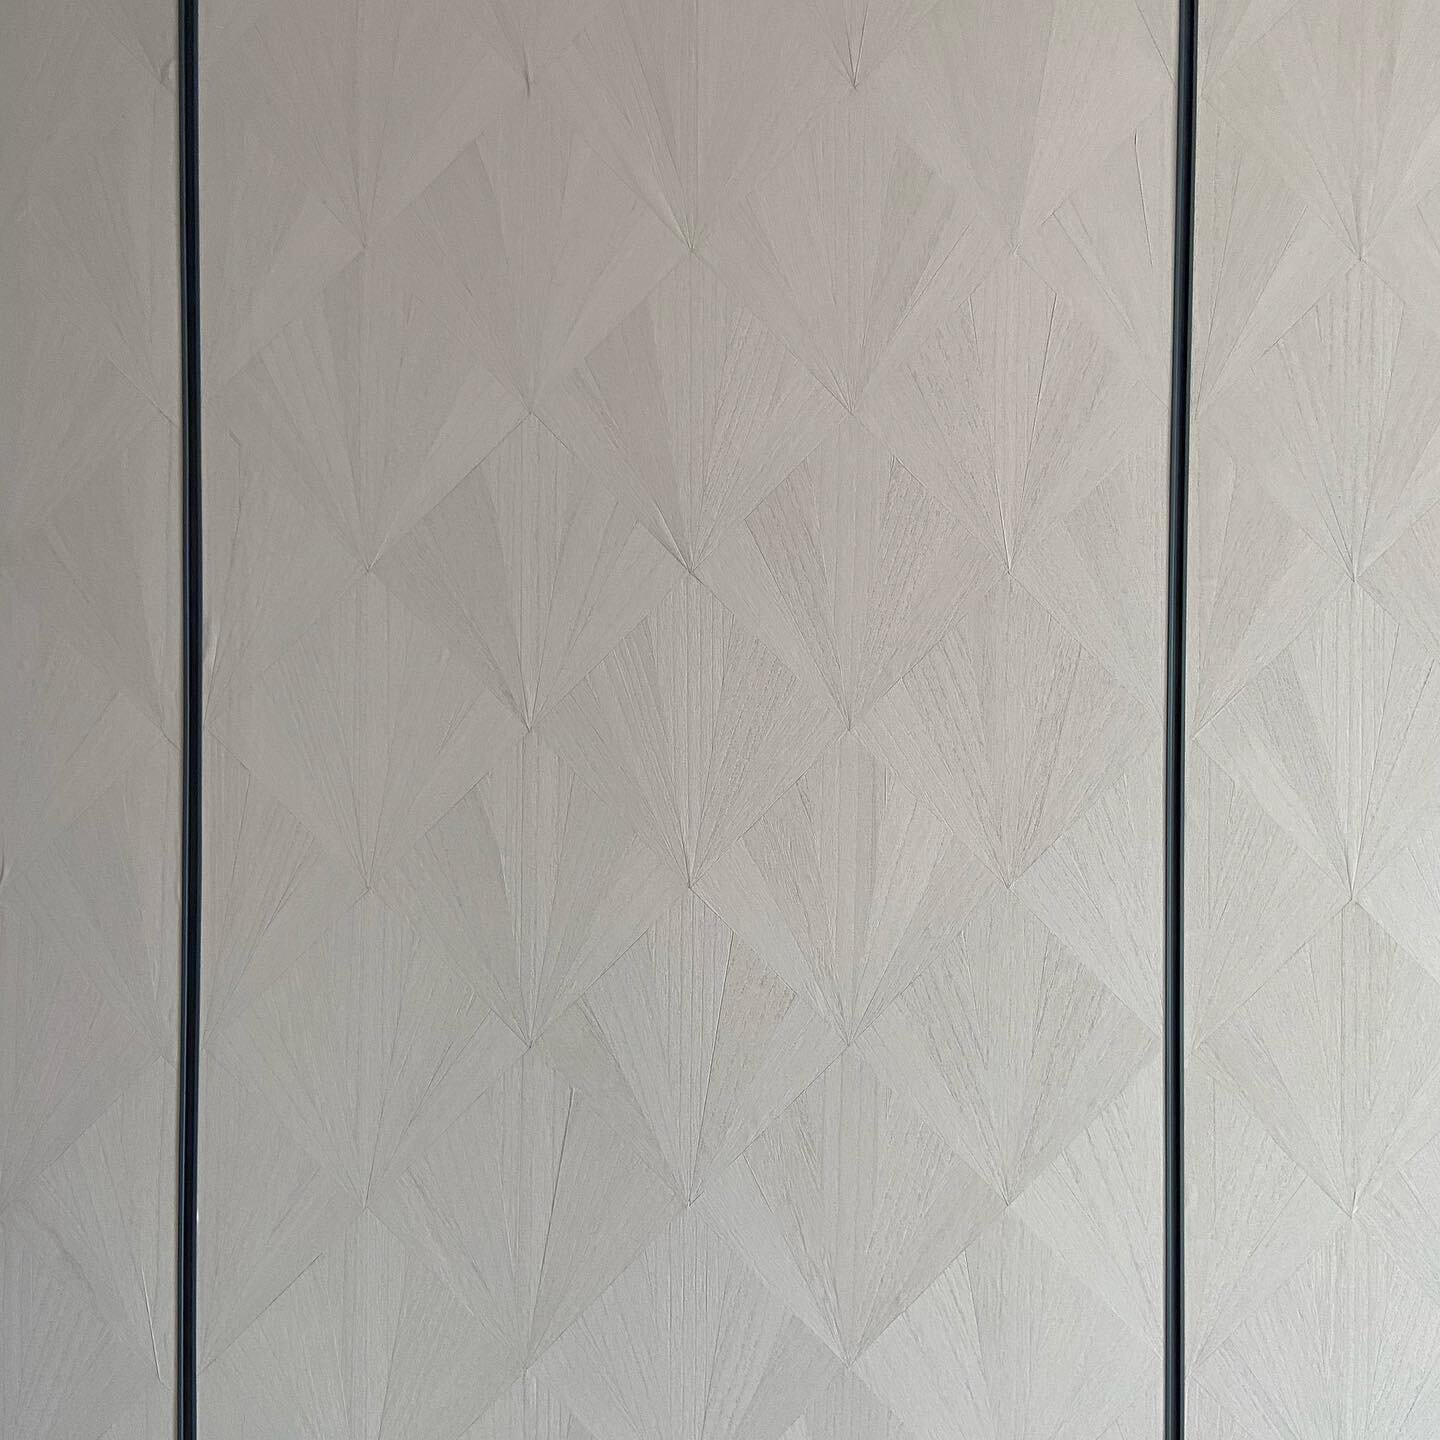 New site handover alert!!! Our special wood veneer series wallpaper handmade by artisans pasting each veneer piece cut in this diamond design &amp; laid by hand @interworldfurnishings 

@archdigestindia @archdigest @homejournal @luxecodemagazine @ell